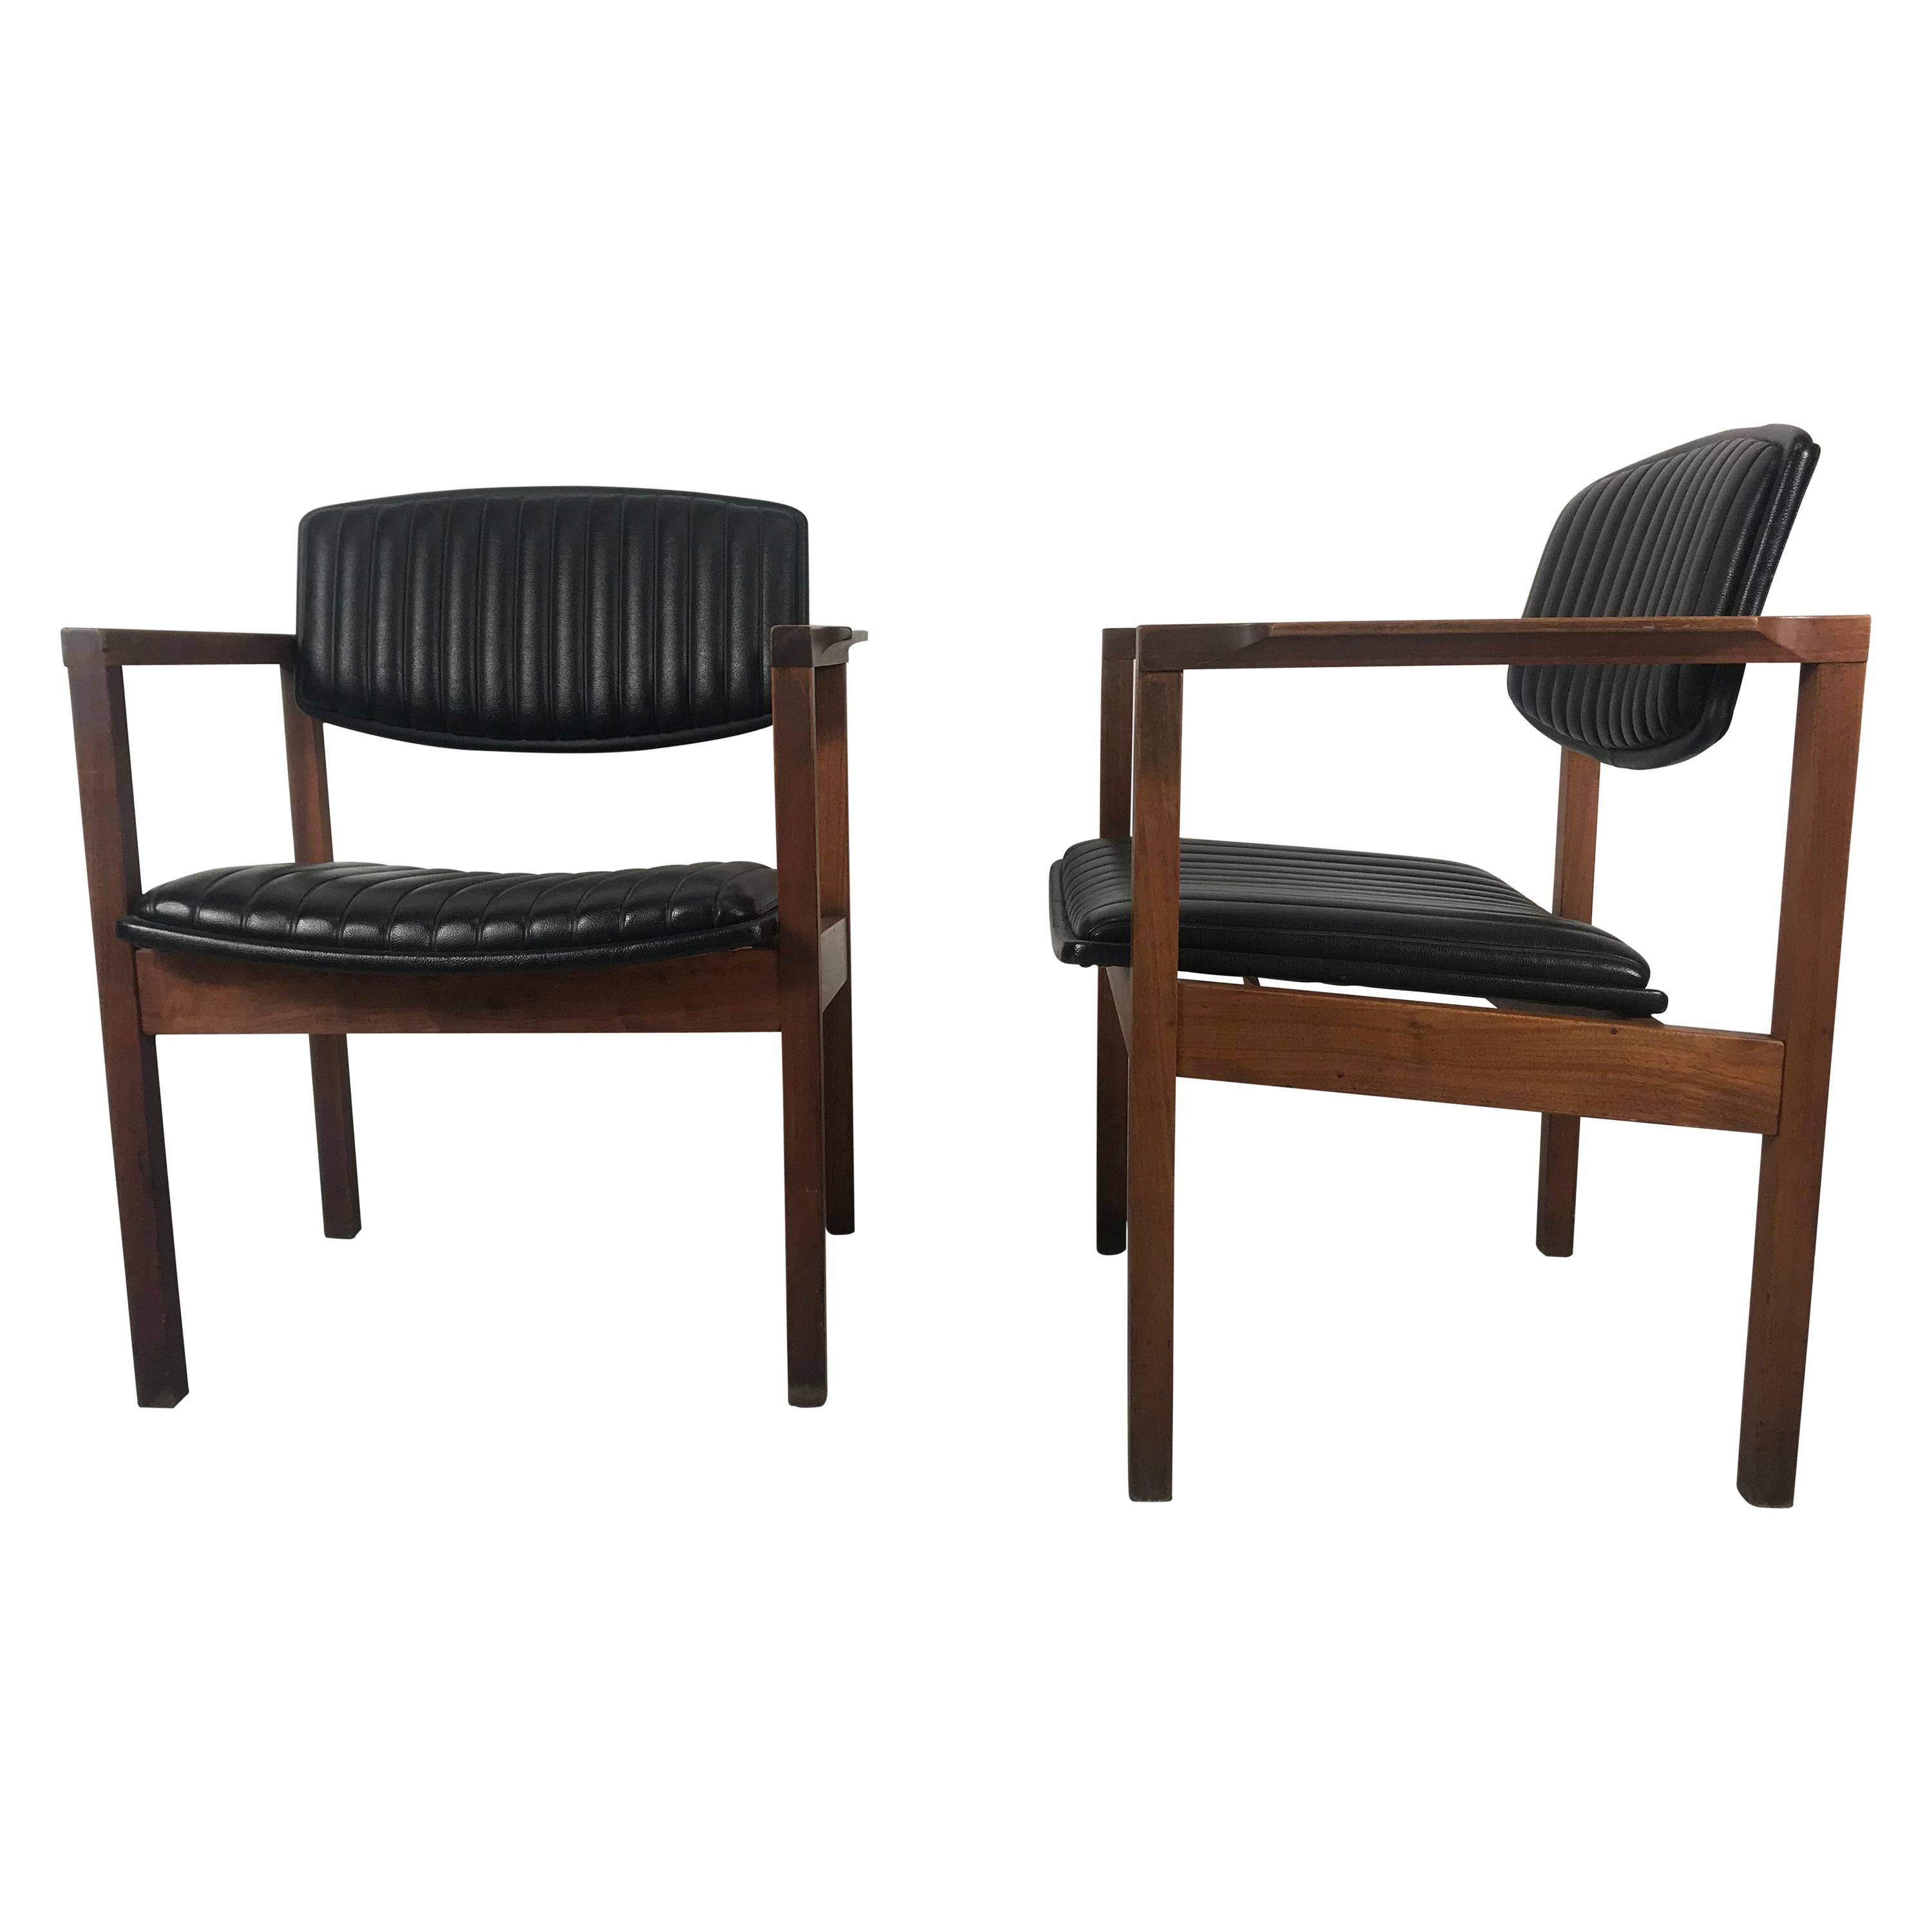 Pair Modernist Walnut and Channeled Naugahyde Lounge Chairs Attr. to Jens Risom